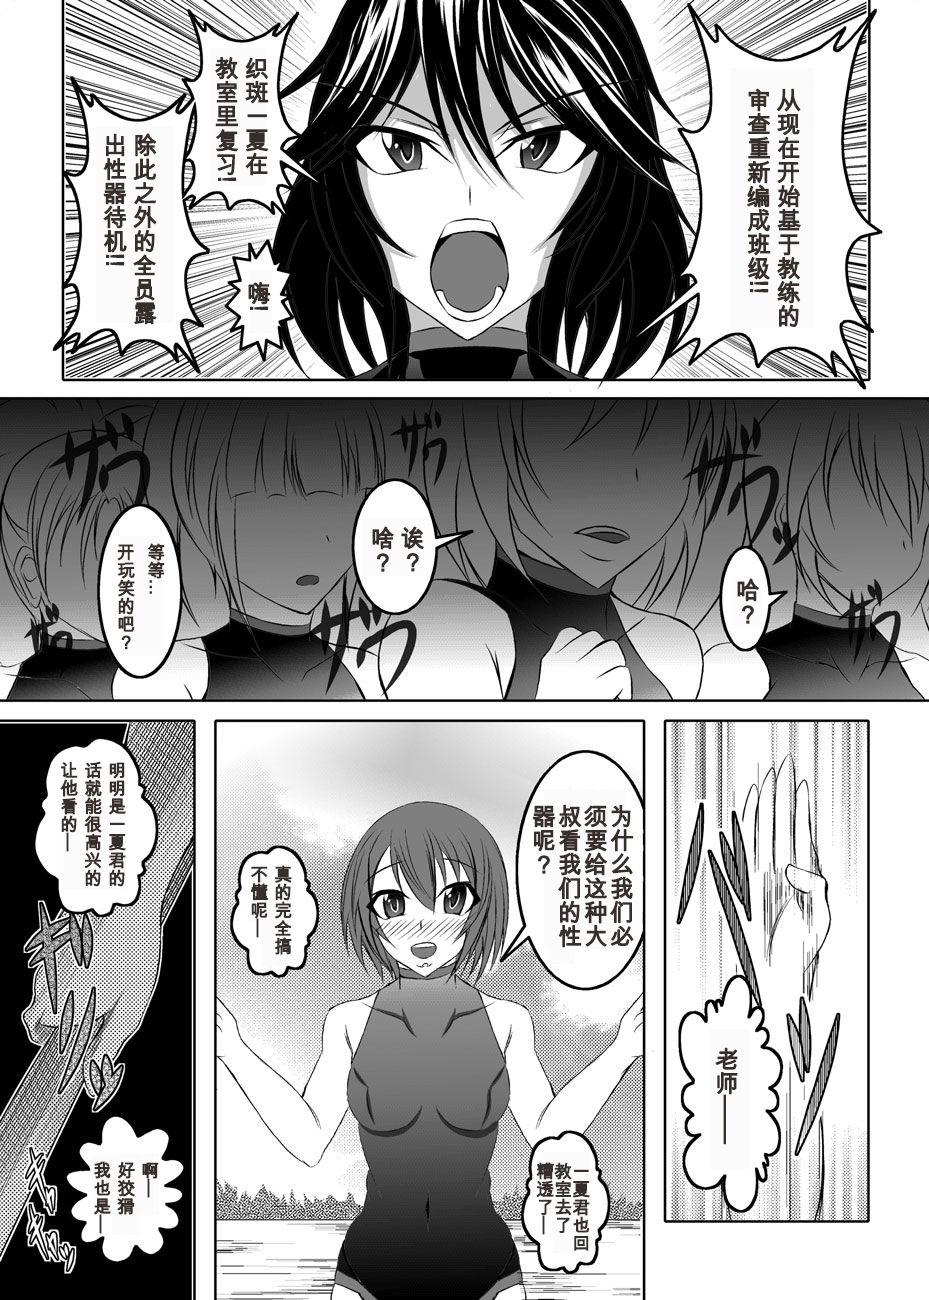 Home GIRLS MEET DQN'S TINPO - Infinite stratos Lady - Page 4